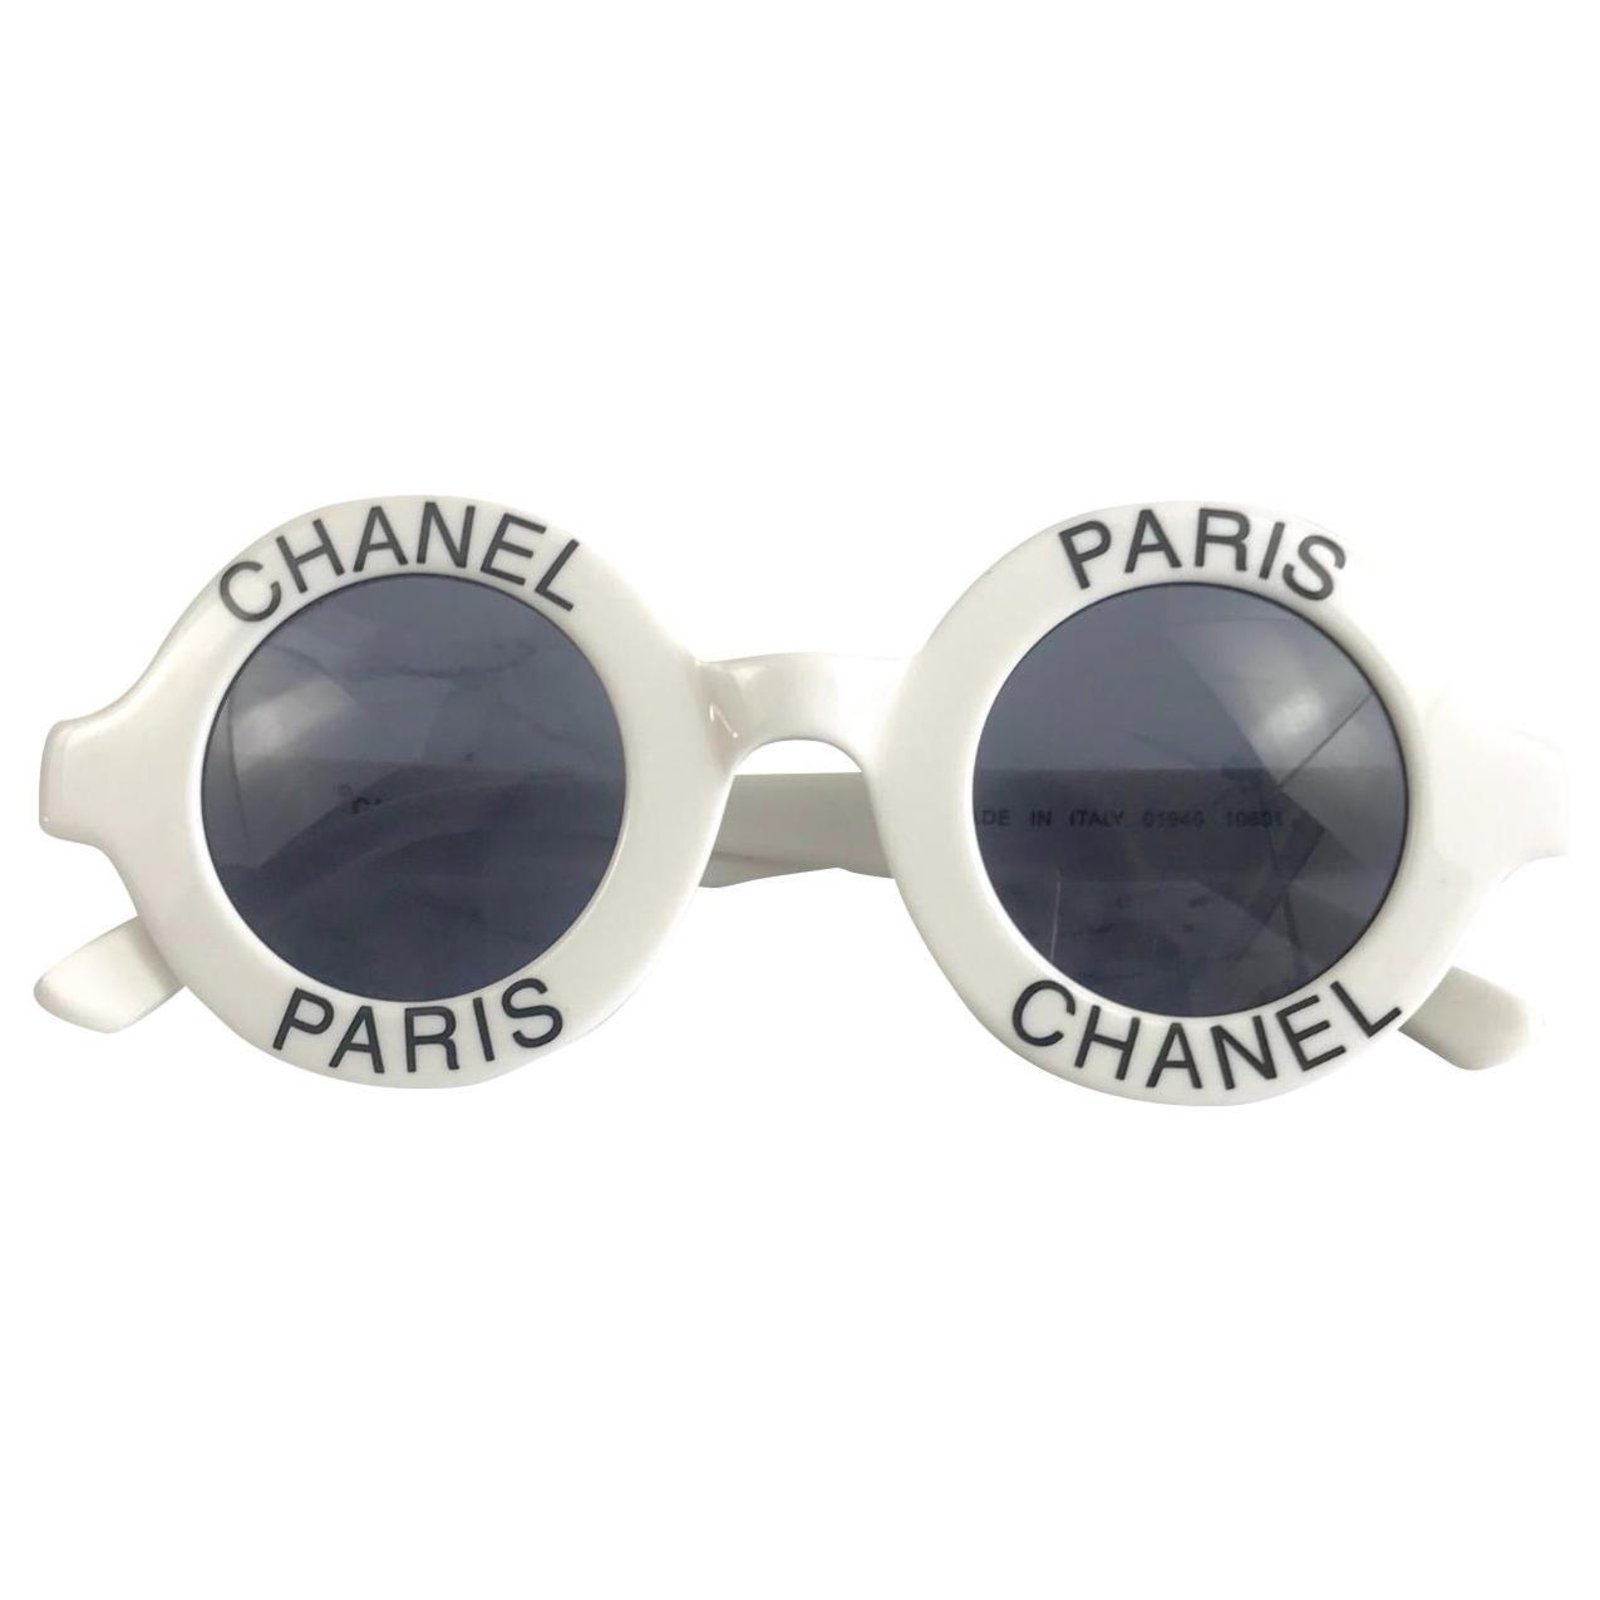 Ultra rare vintage sunglasses Chanel years 90's